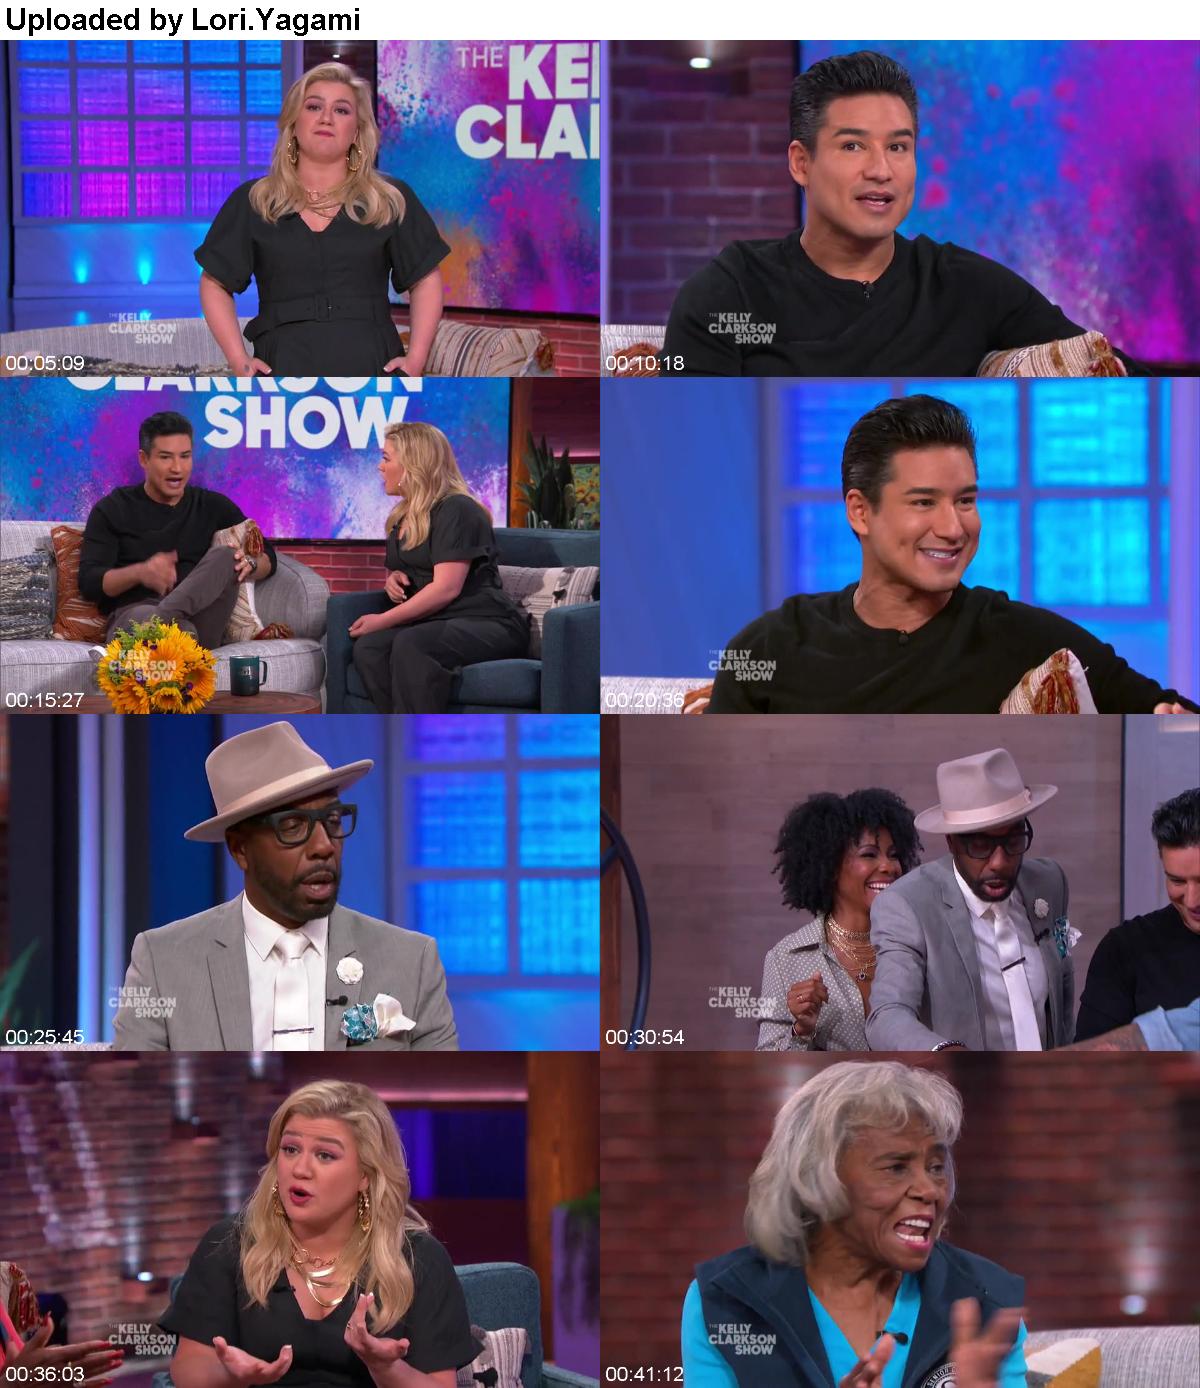 The Kelly Clarkson Show 2019 10 22 Mario Lopez WEB x264-COOKIEMONSTER